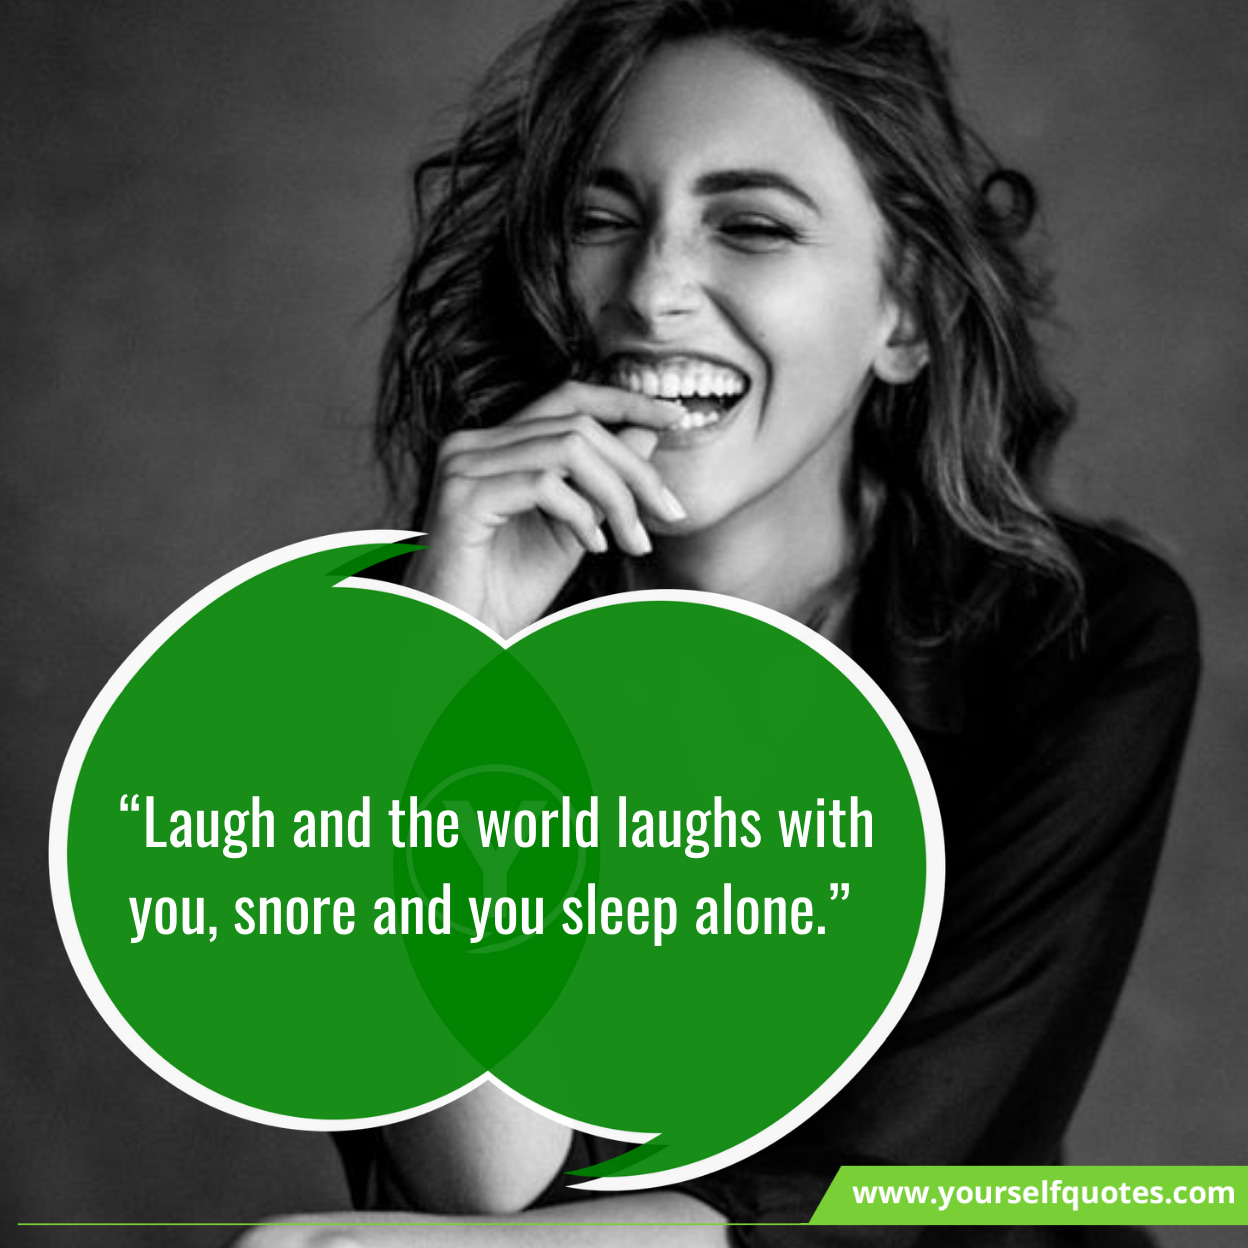 Best Alone Quotes